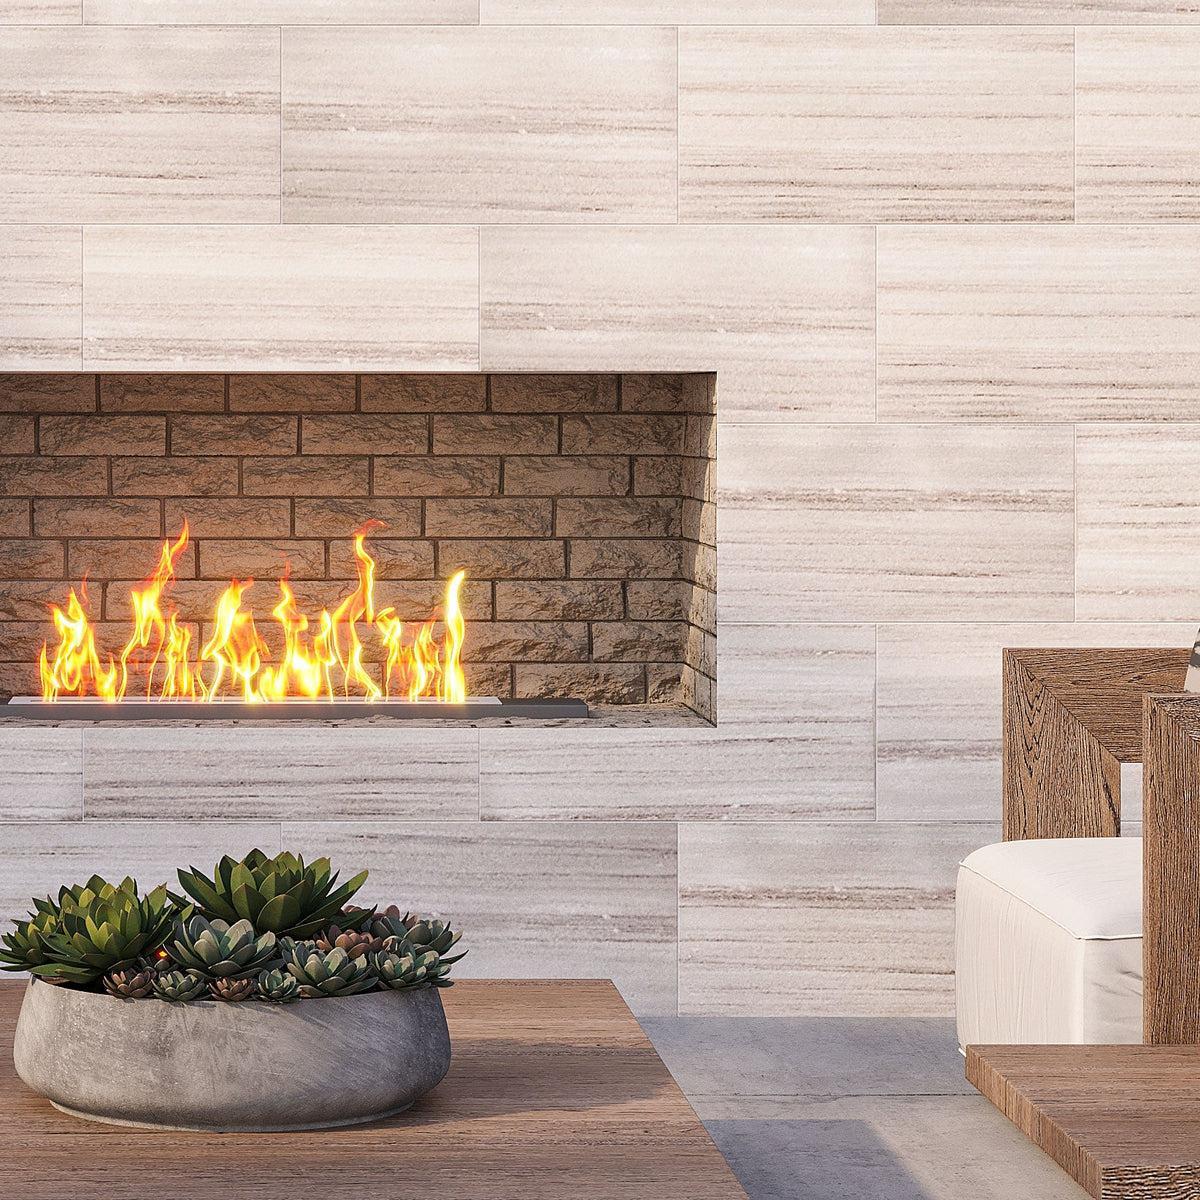 Beige marble tile outdoor fireplace surround